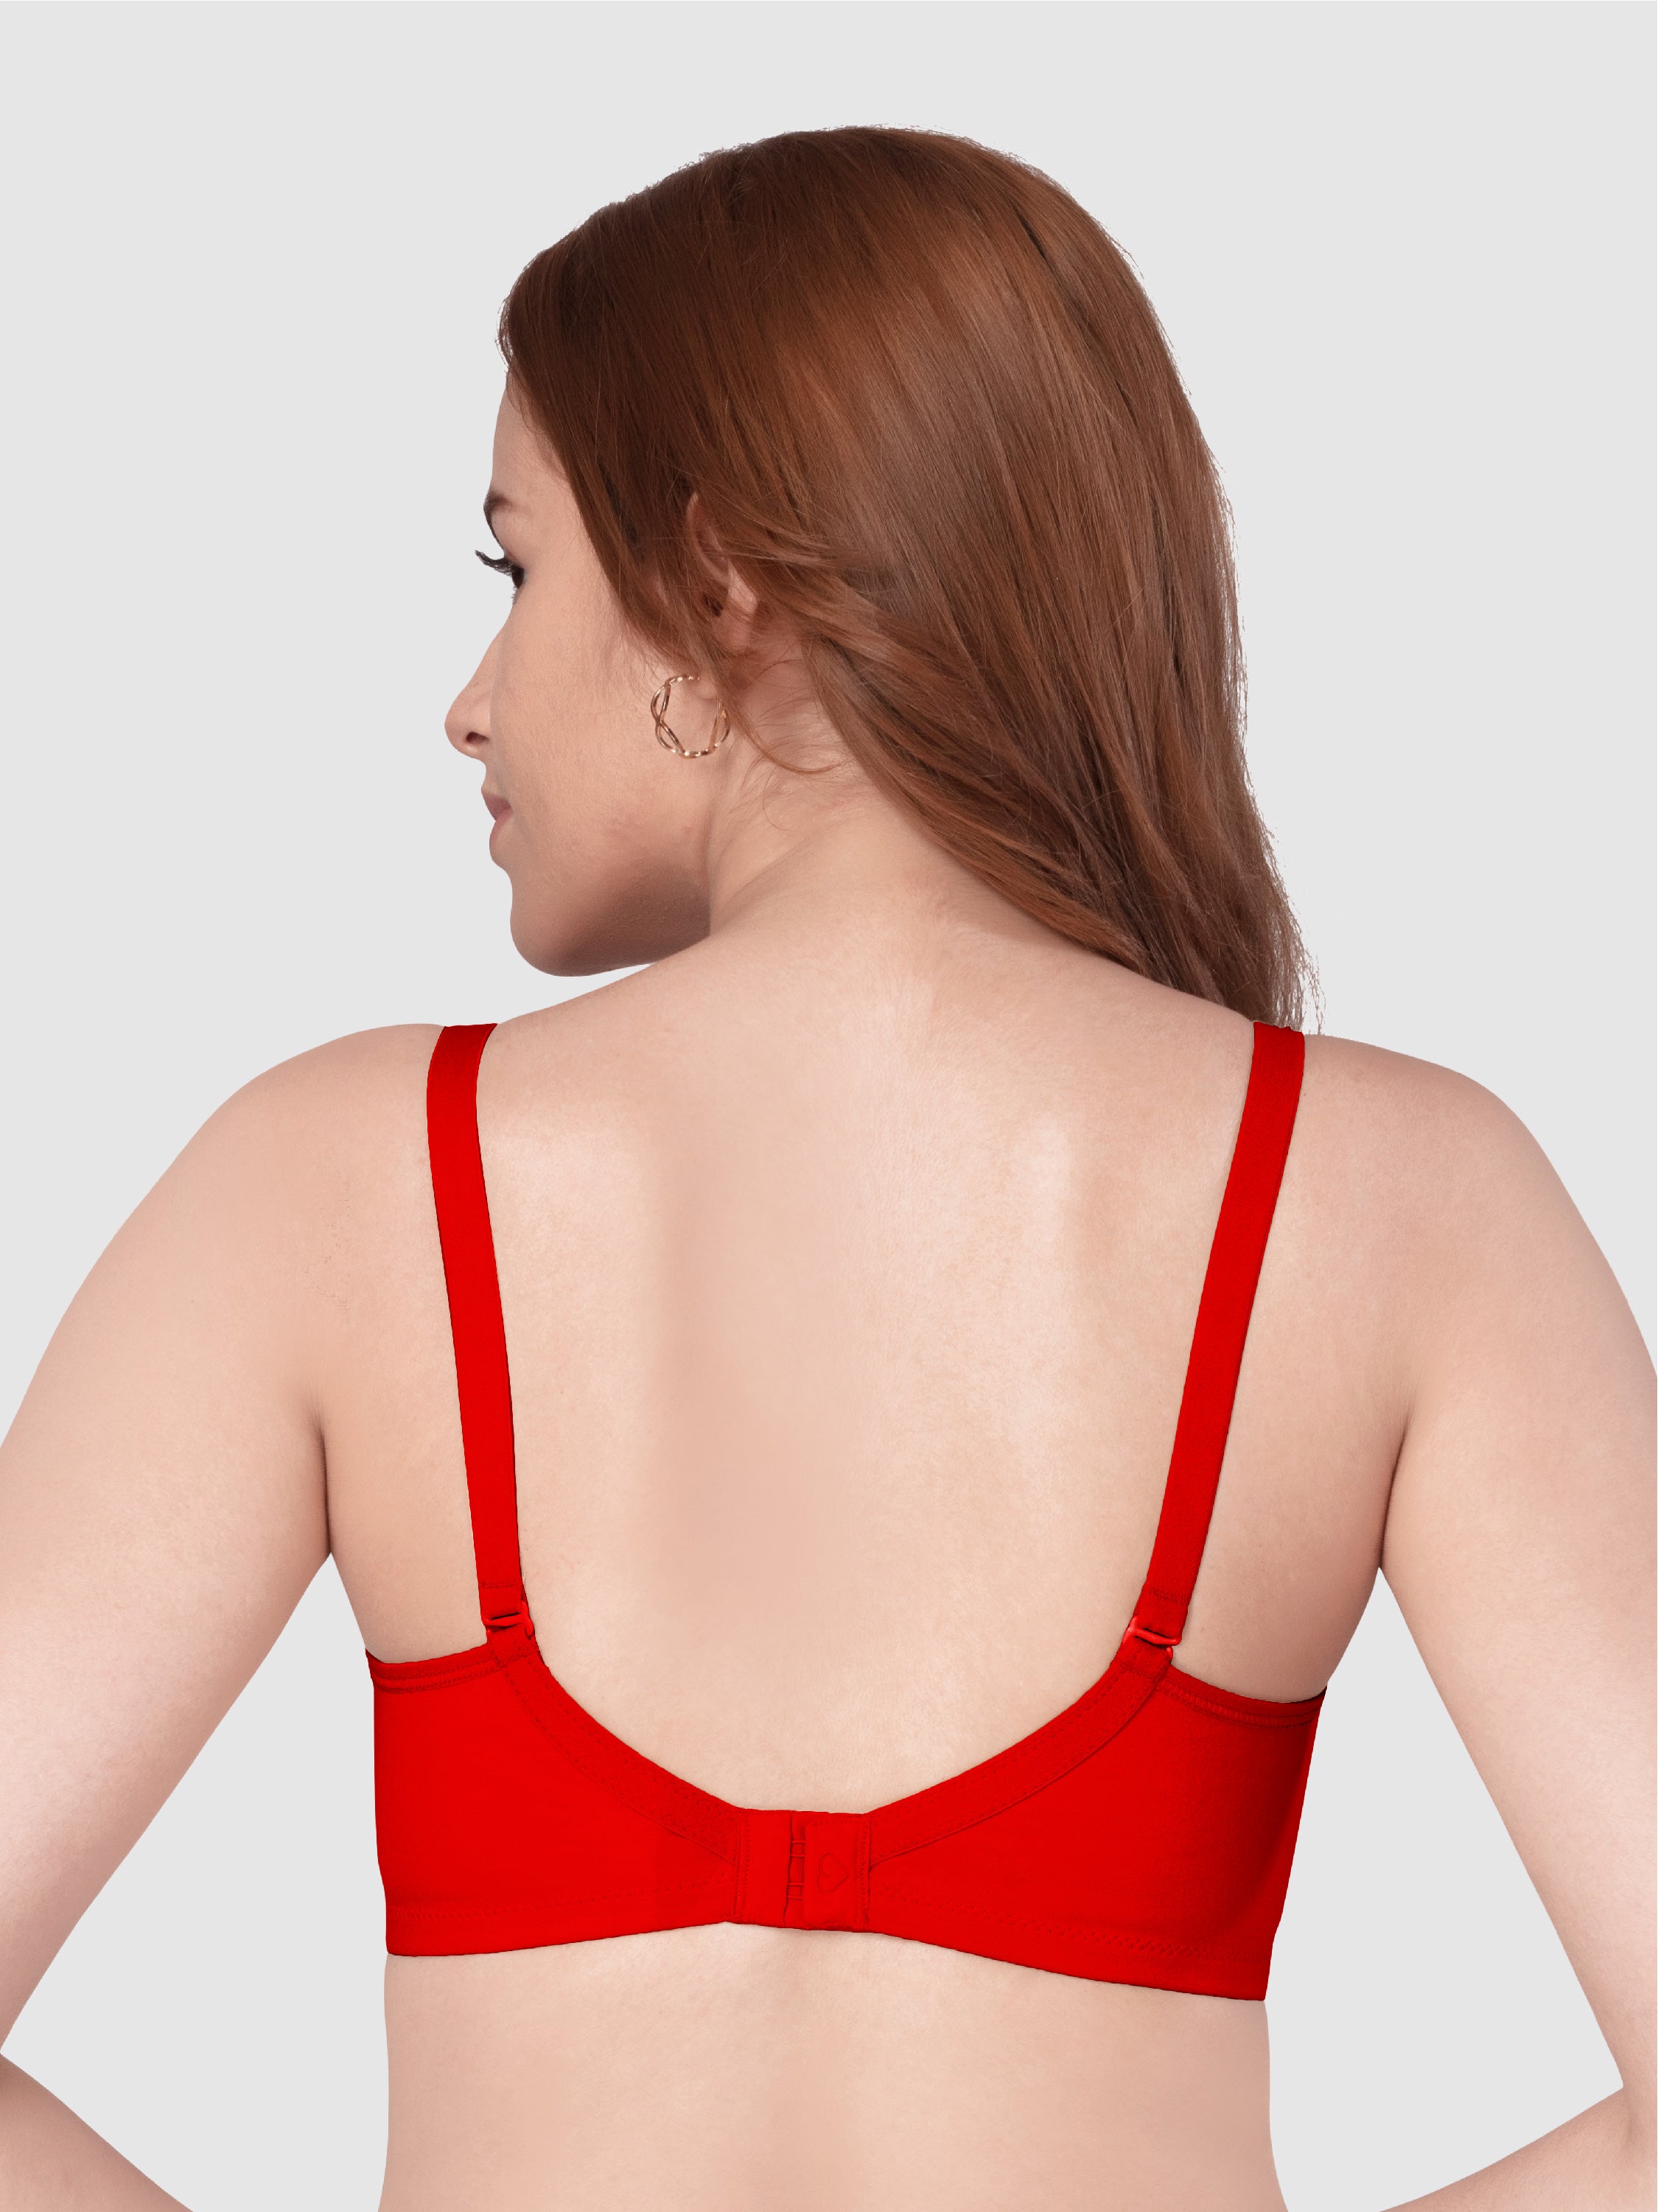 Daisy Dee Crimson Red Lightly Padded Non Wired Full Coverage Bra - NZNTH-Crimson Red